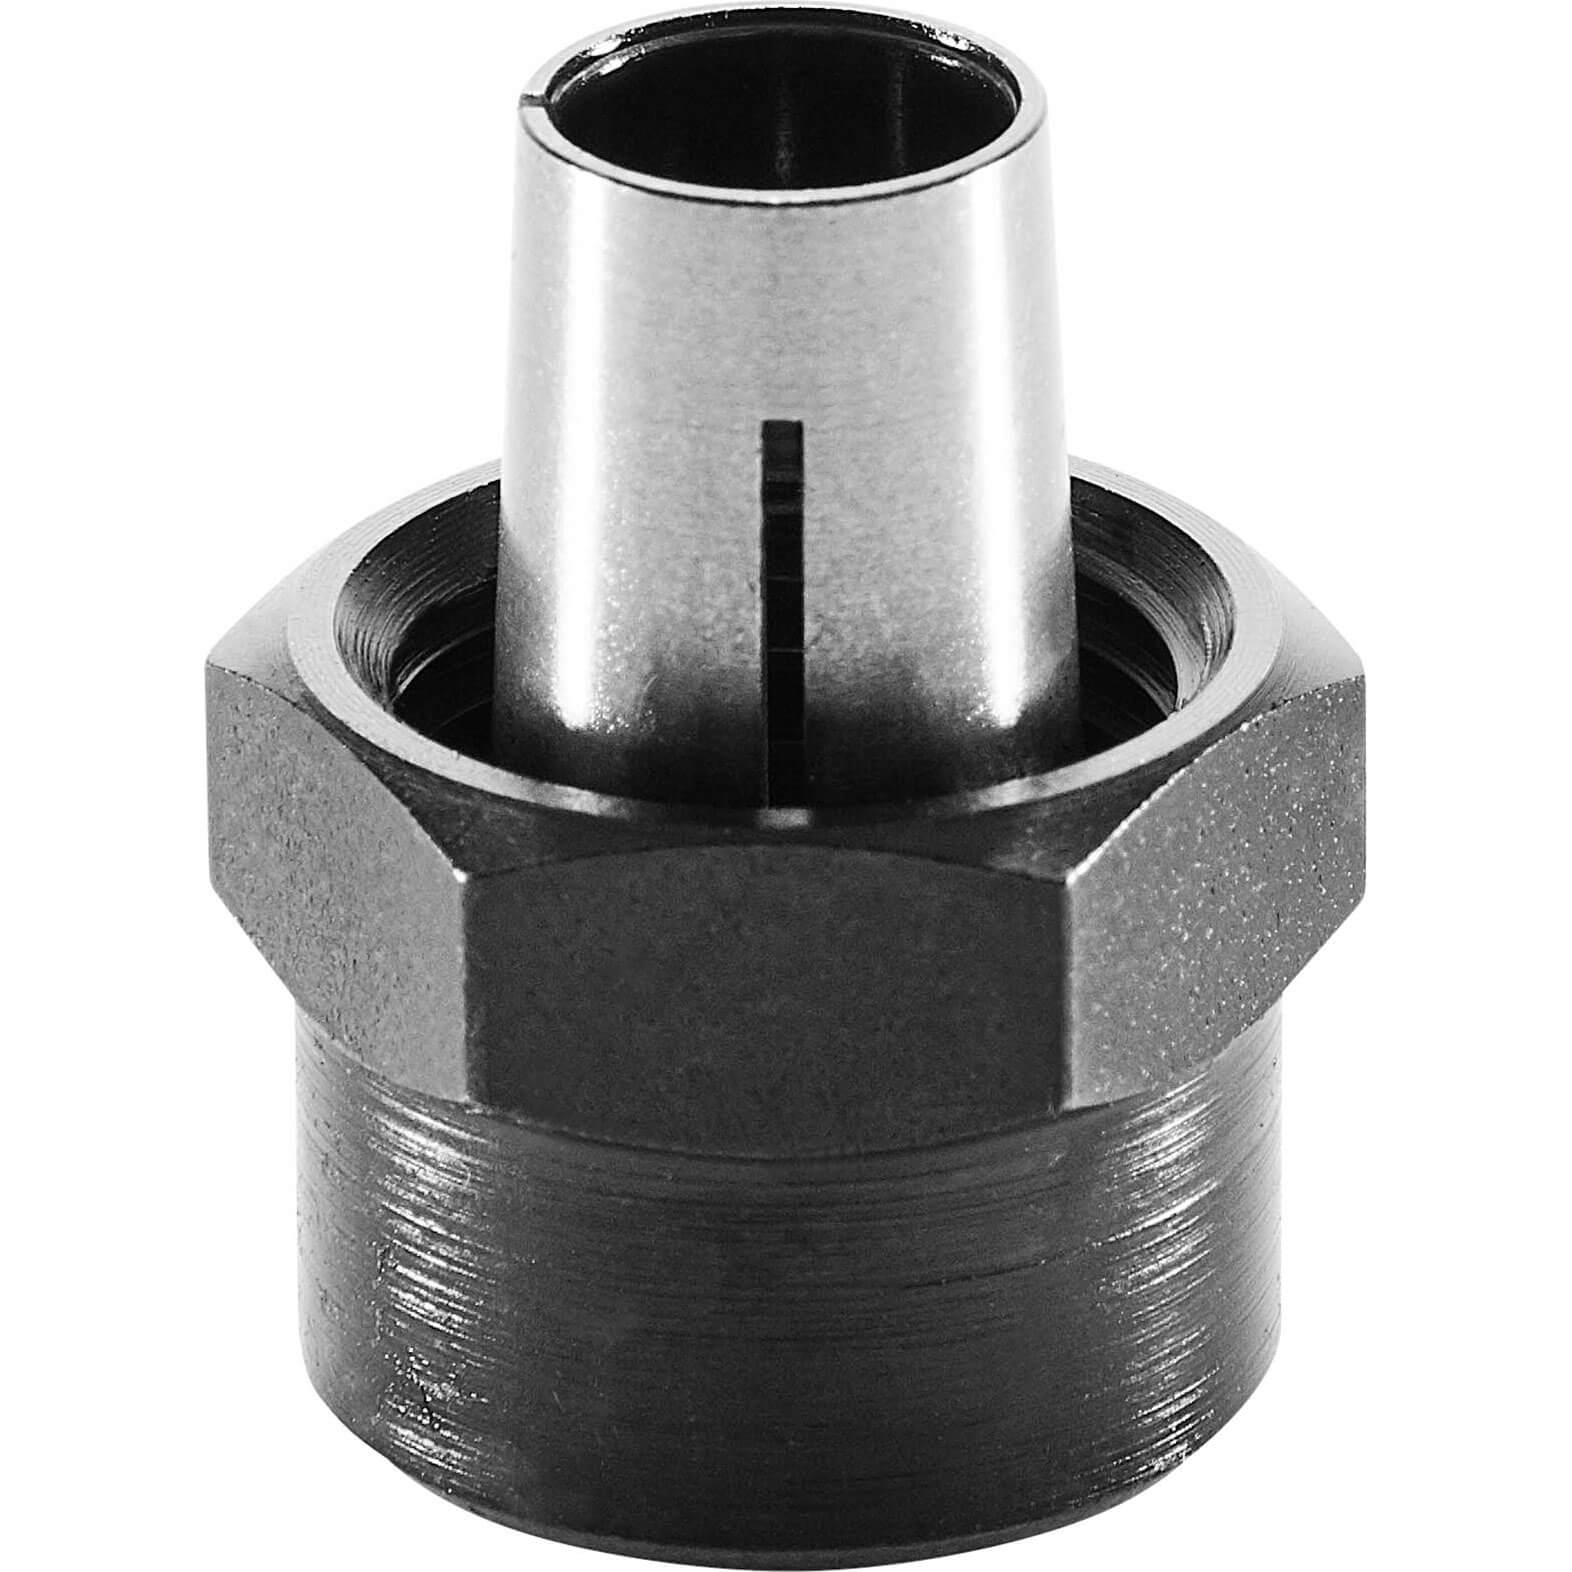 Image of Festool Router Collet For Festool Router OF1010 8mm